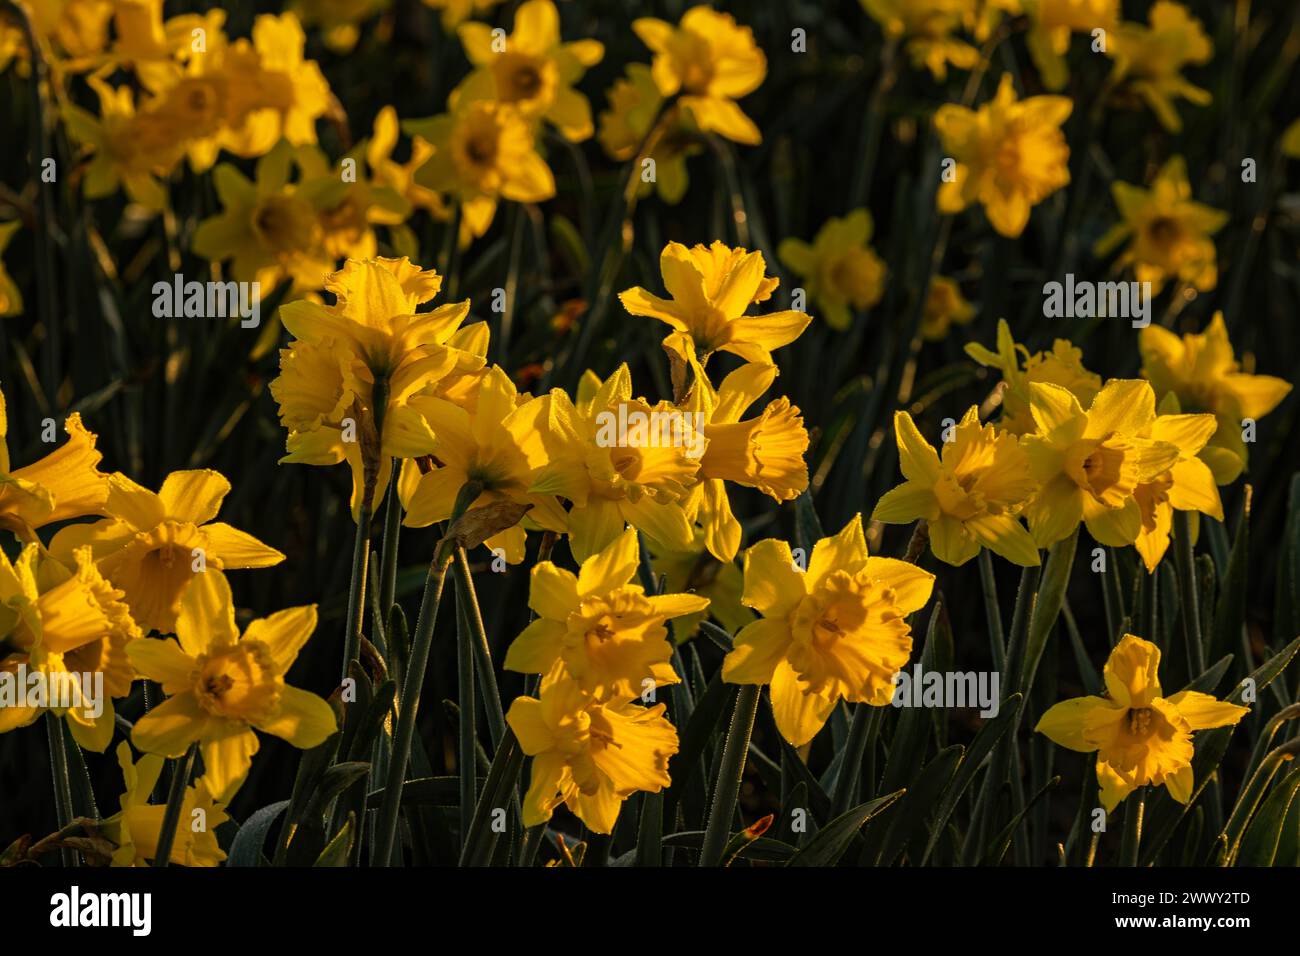 WA25126-00...WASHINGTON - A commercial field of daffodils blooming at sunrise in the Skagit Valley near Mount Vernon. Stock Photo